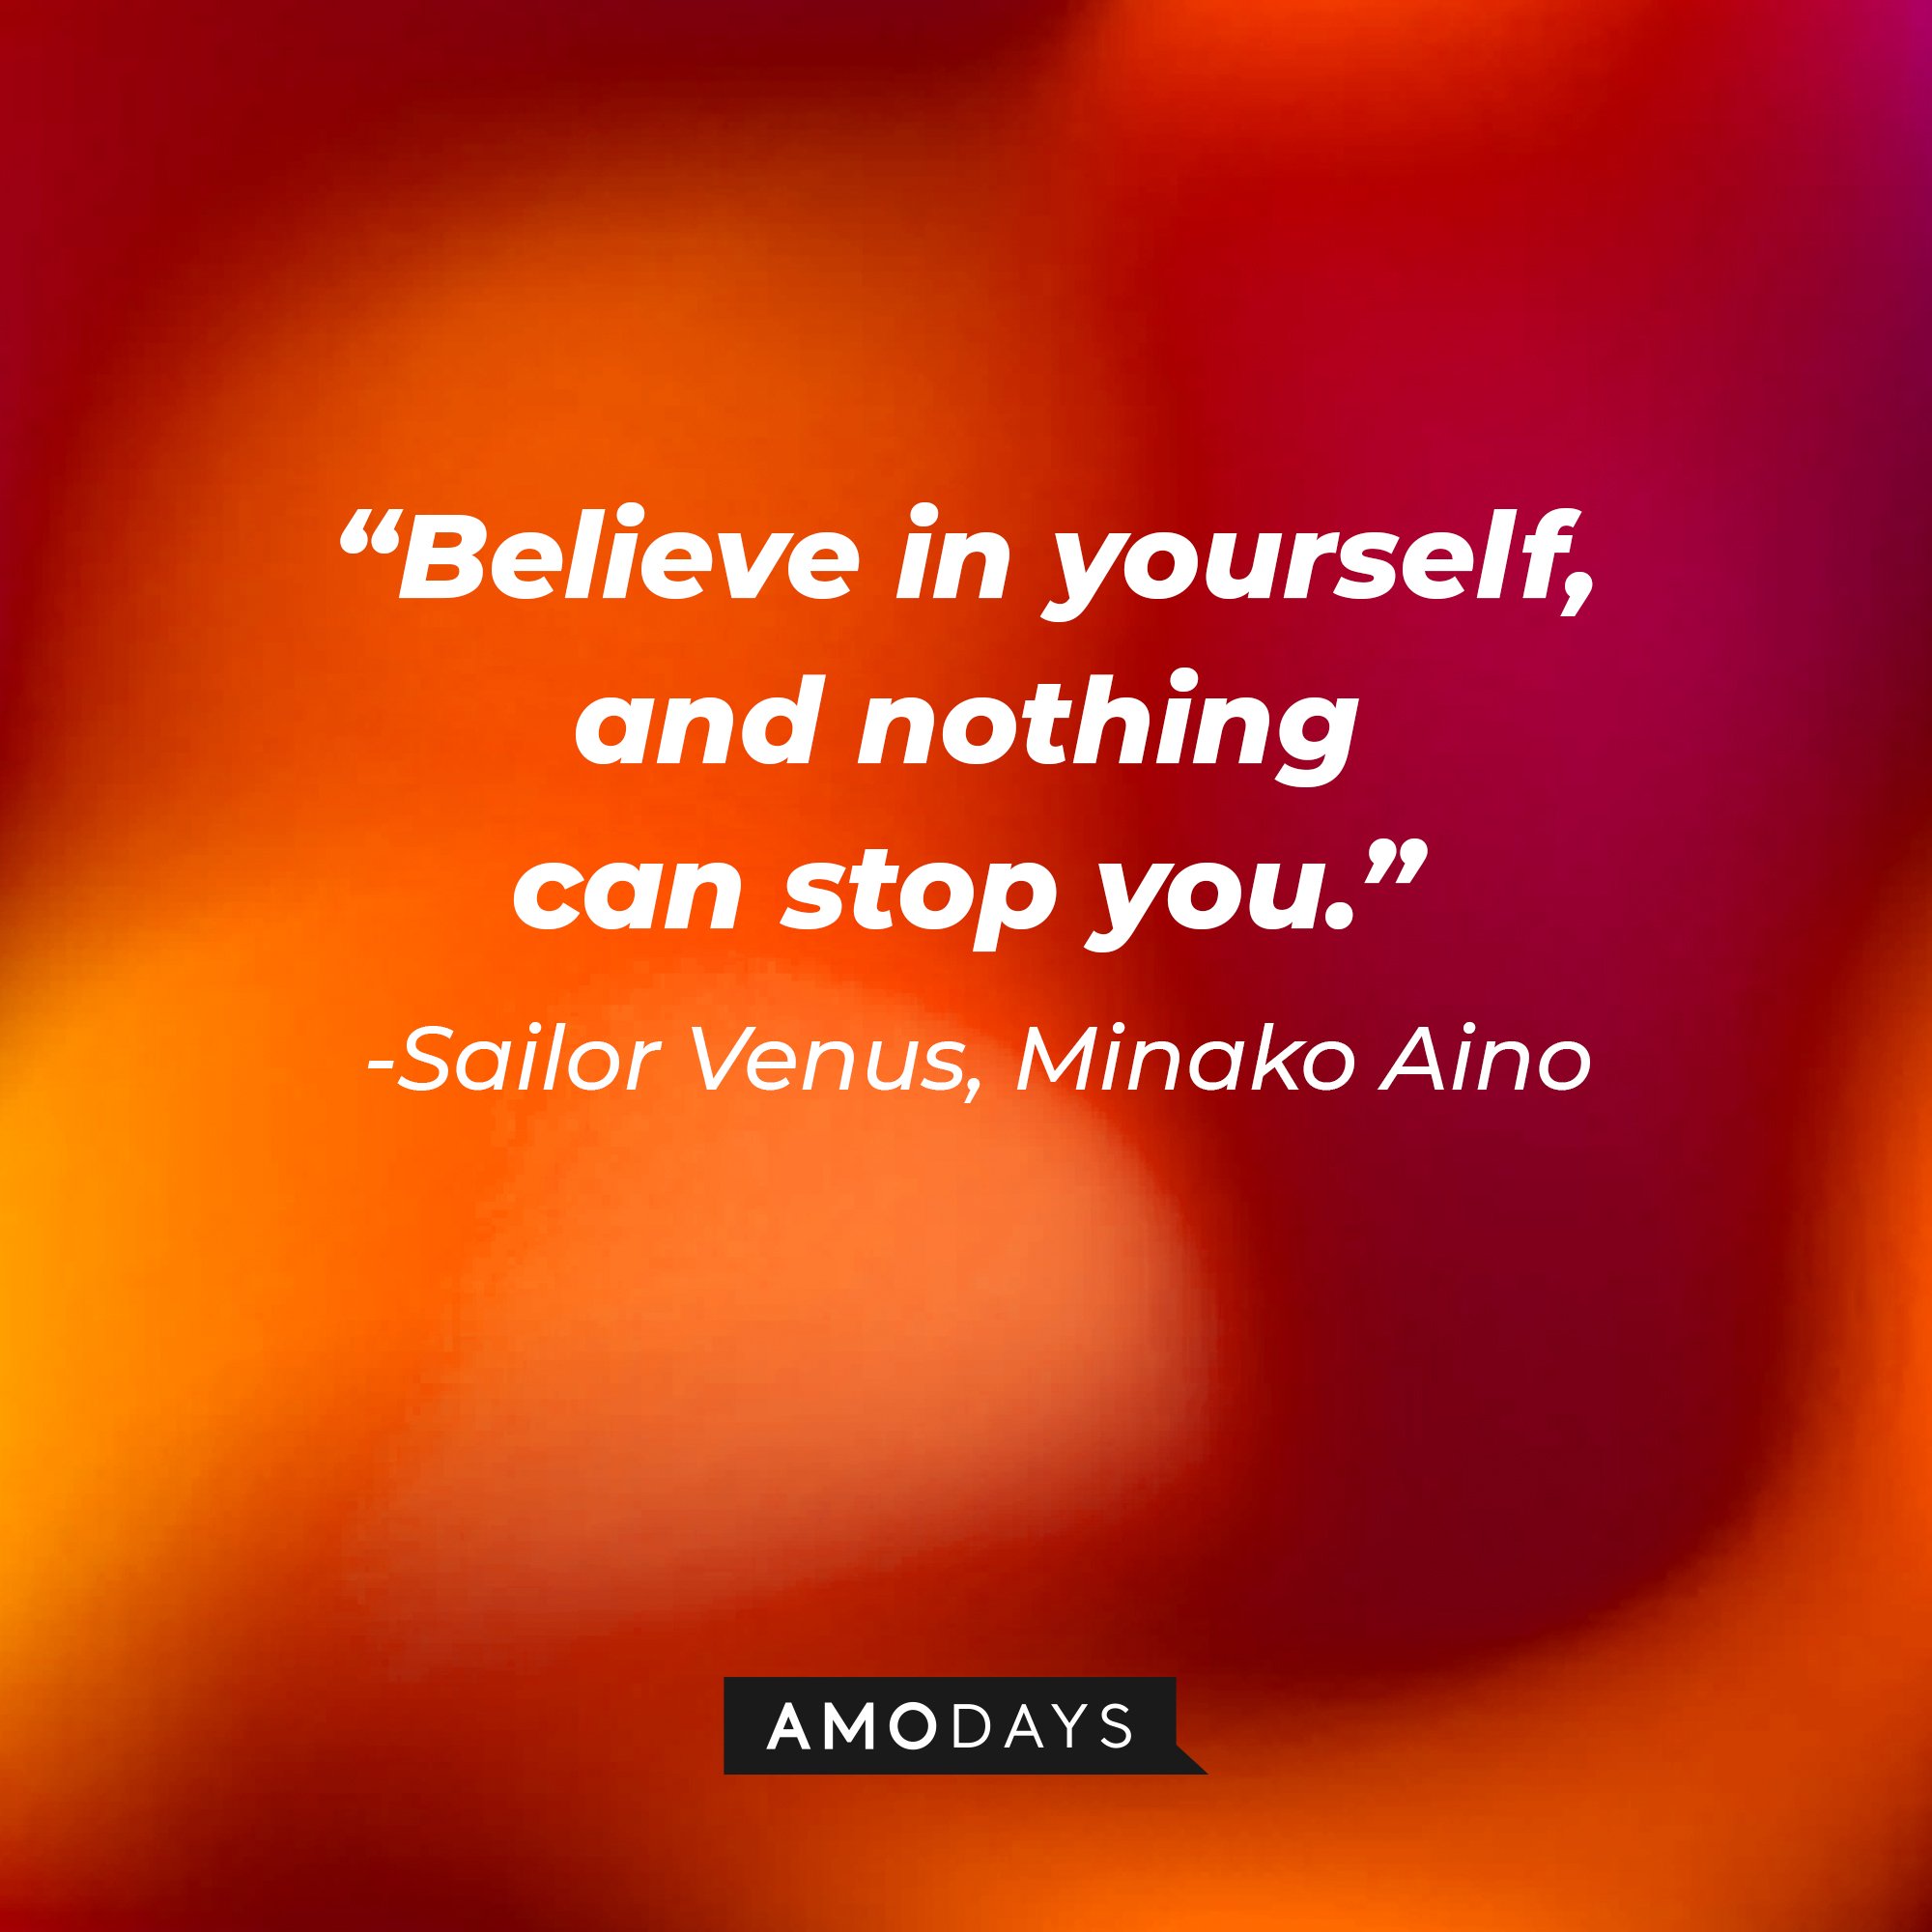 Sailor Venus/Minako Aino’s quote: "Believe in yourself, and nothing can stop you” | Image: AmoDays